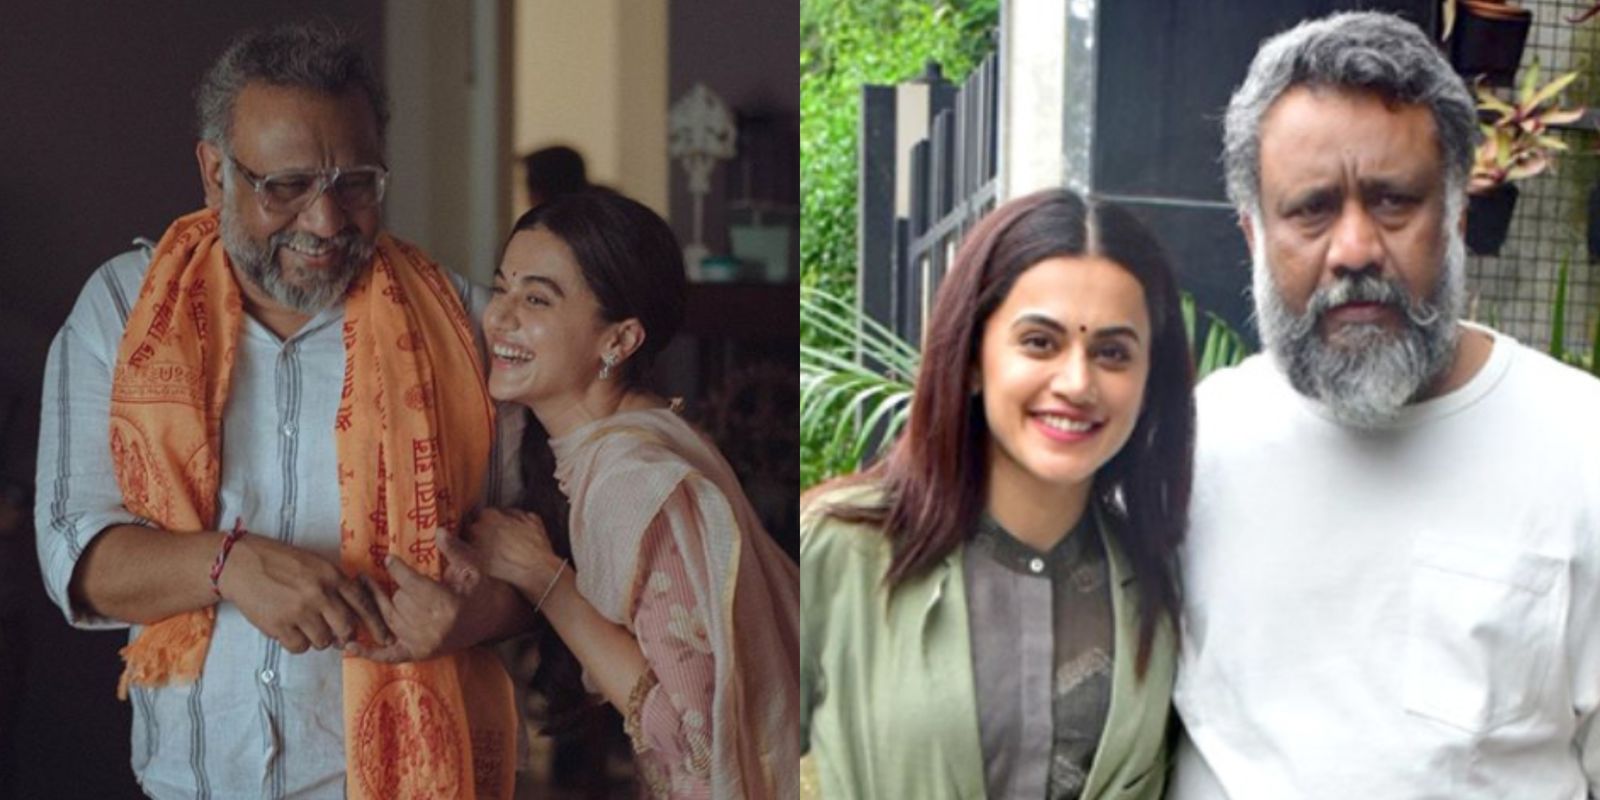 Thappad: Ahead Of The Film’s Release, Taapsee Pannu Shares An Appreciation Post For Director Anubhav Sinha